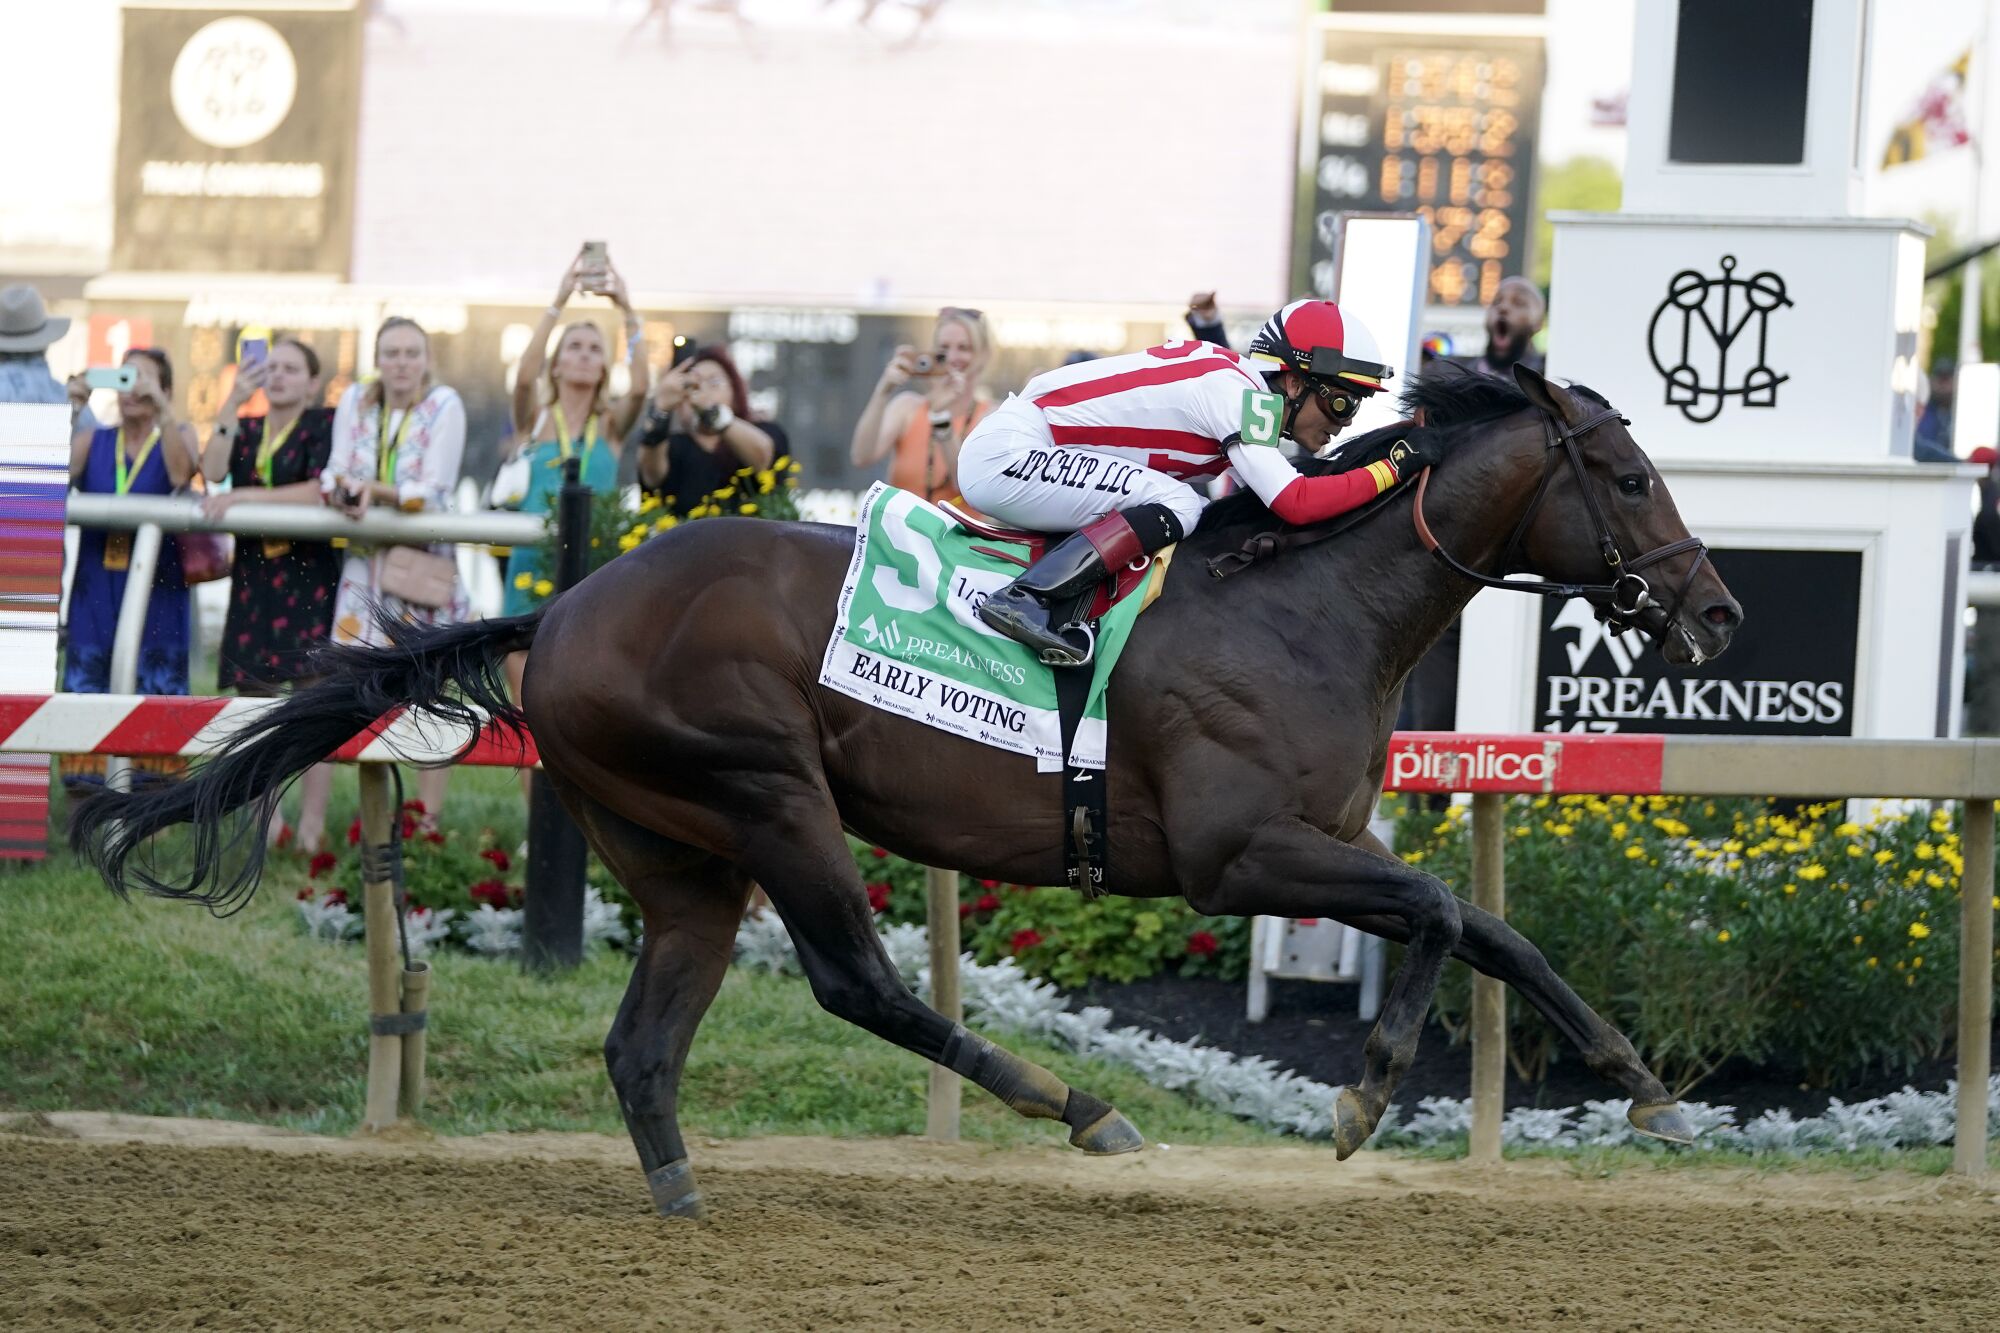 Jose Ortiz atop Early Voting wins the 147th running of the Preakness Stakes